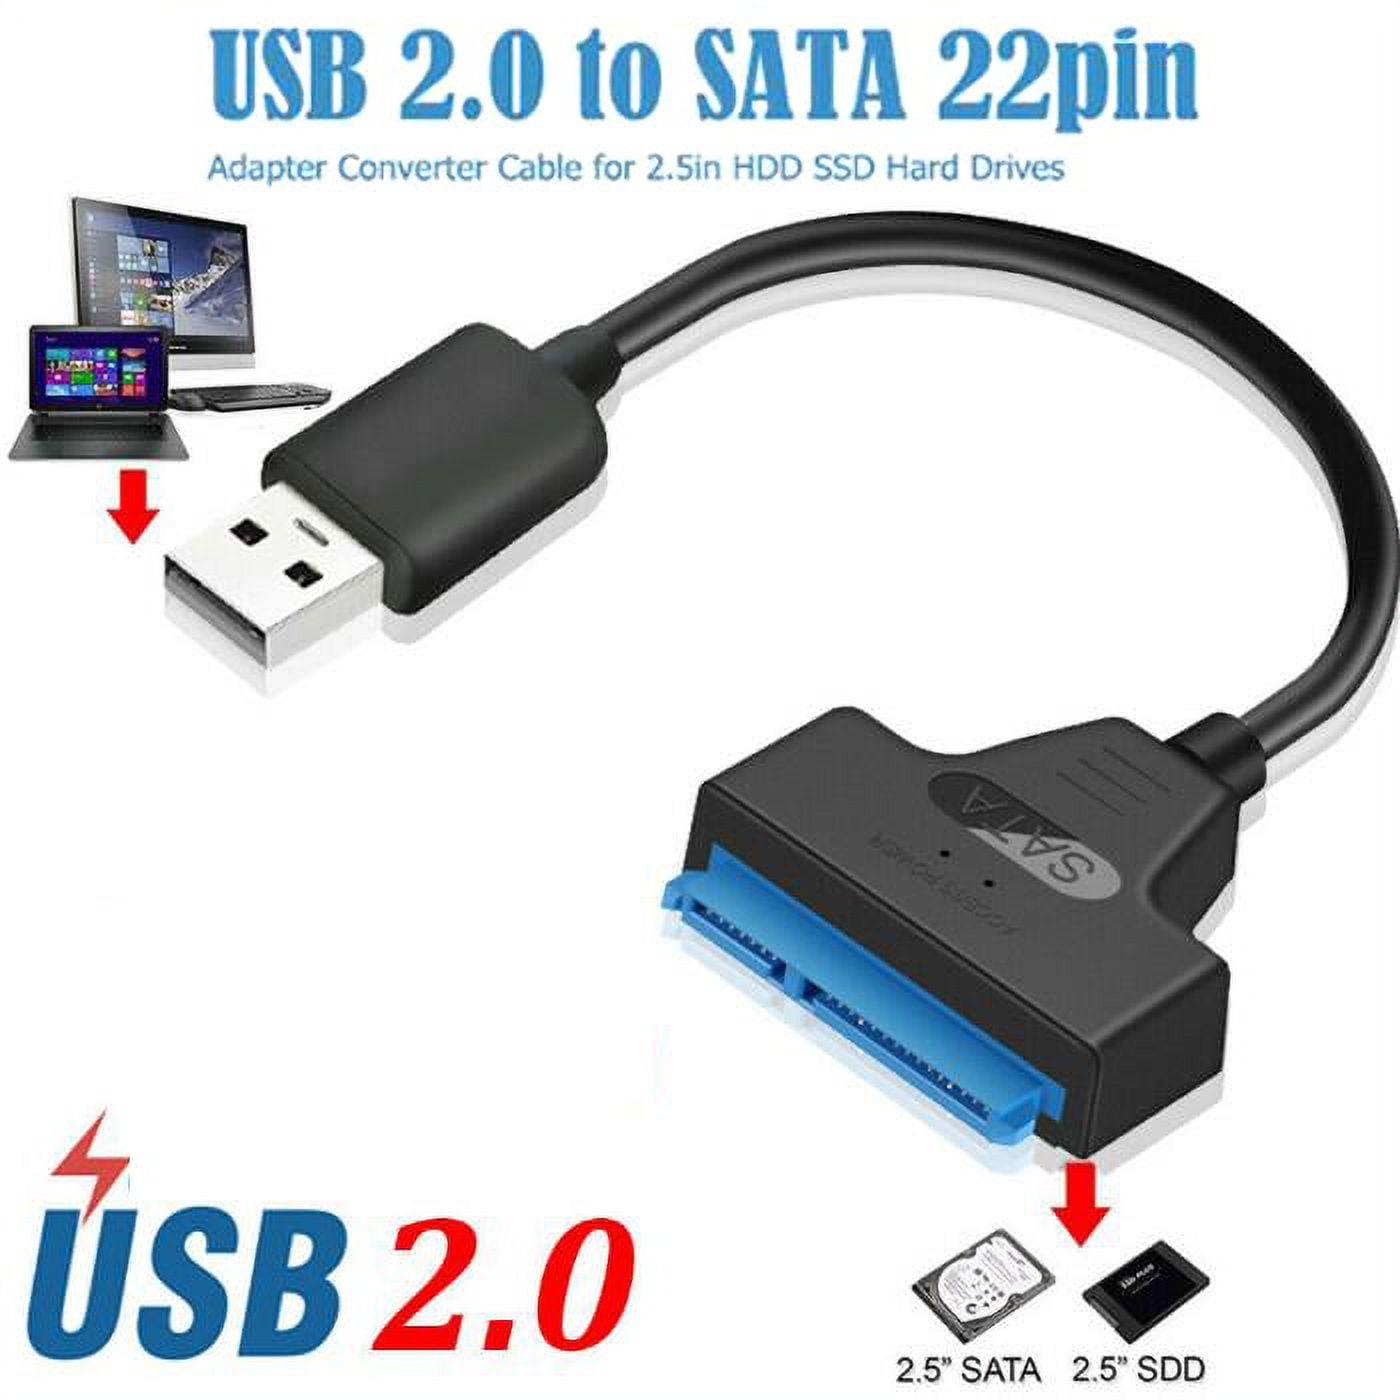 LUOM SATA to USB3.0 Adapter, USB 3.0 to SATA, 22 pin USB Cable 3.0 to SATA  us Adapter for 2.5 inch 3.5 inch HDD SSD Hard Drive, Support UASP, Black  (2.5 inch 3.5 inch) 